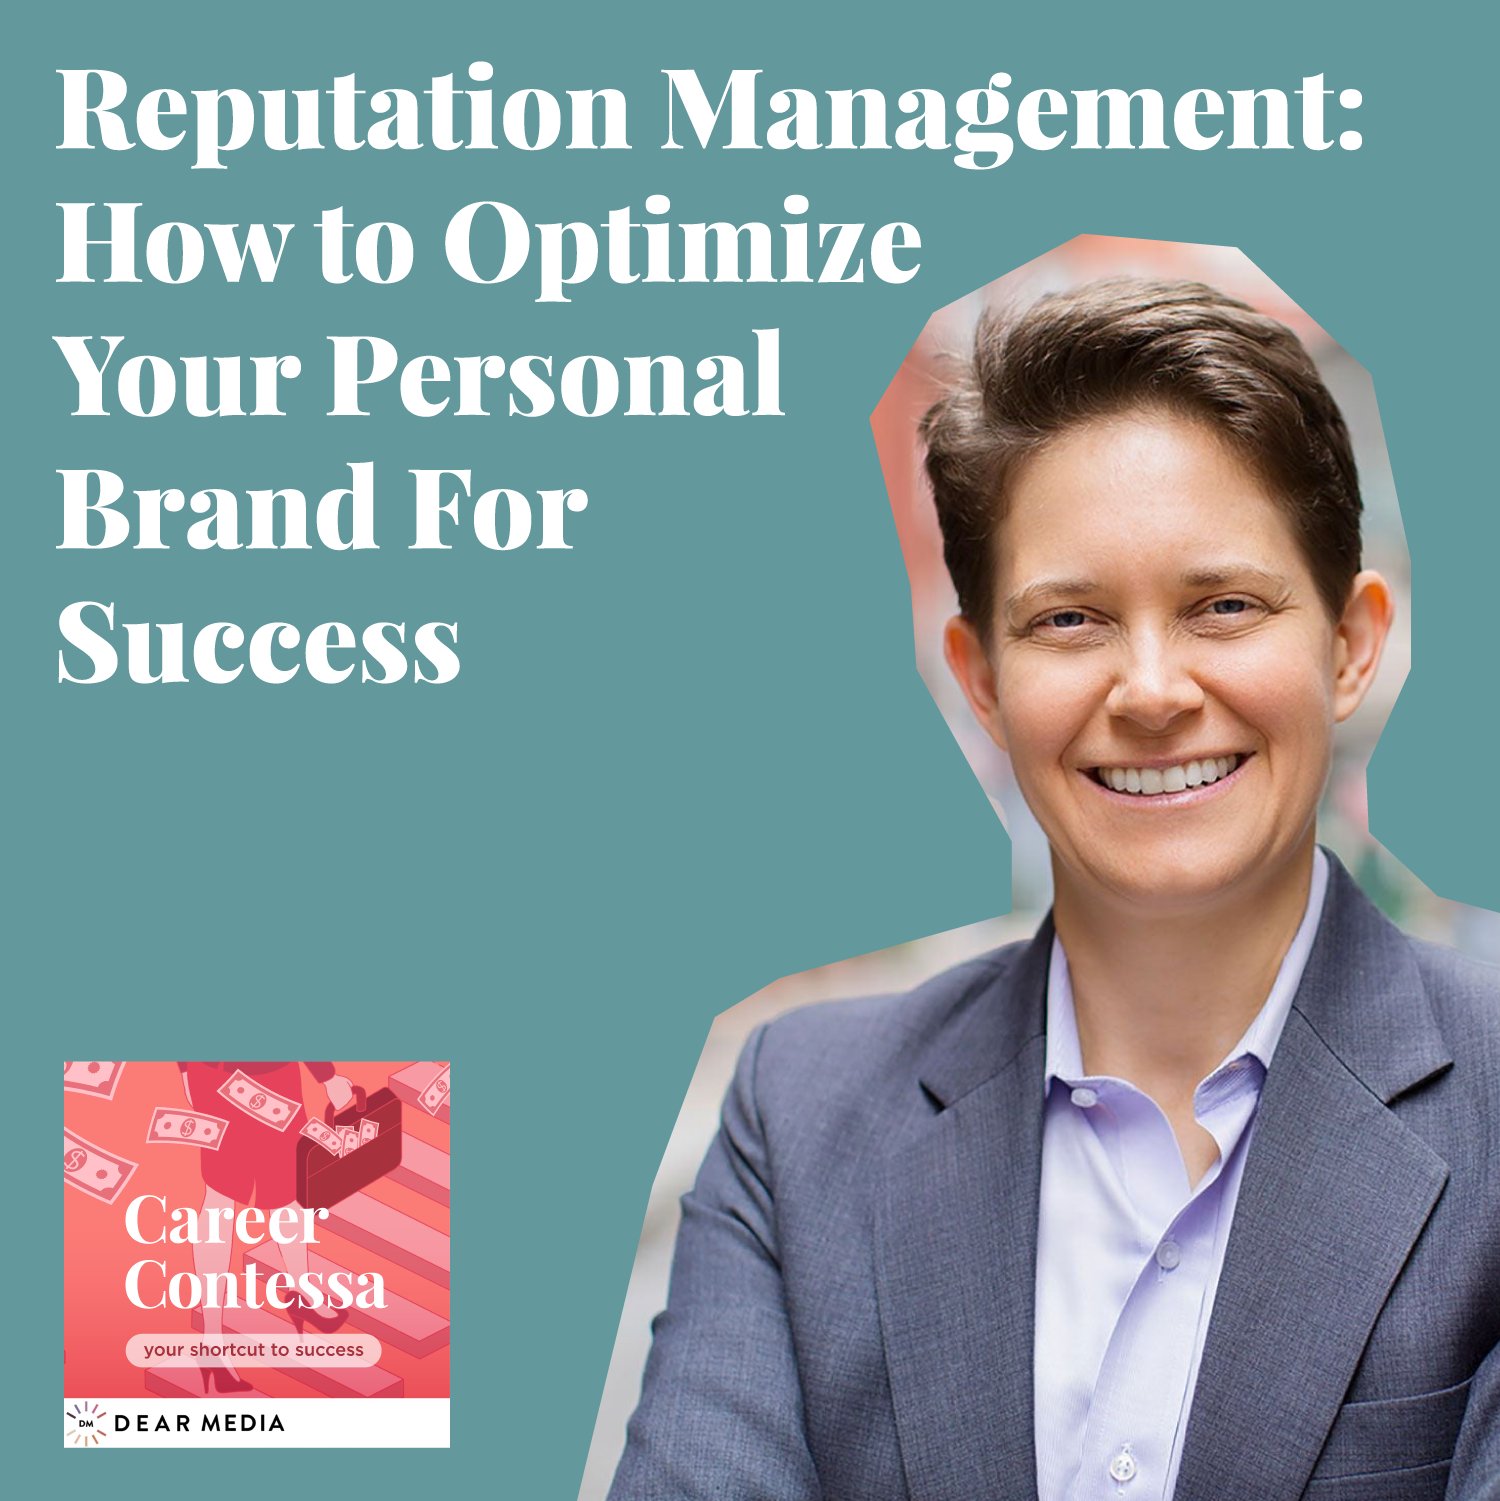 Reputation Management: How to Optimize Your Personal Brand For Success Image